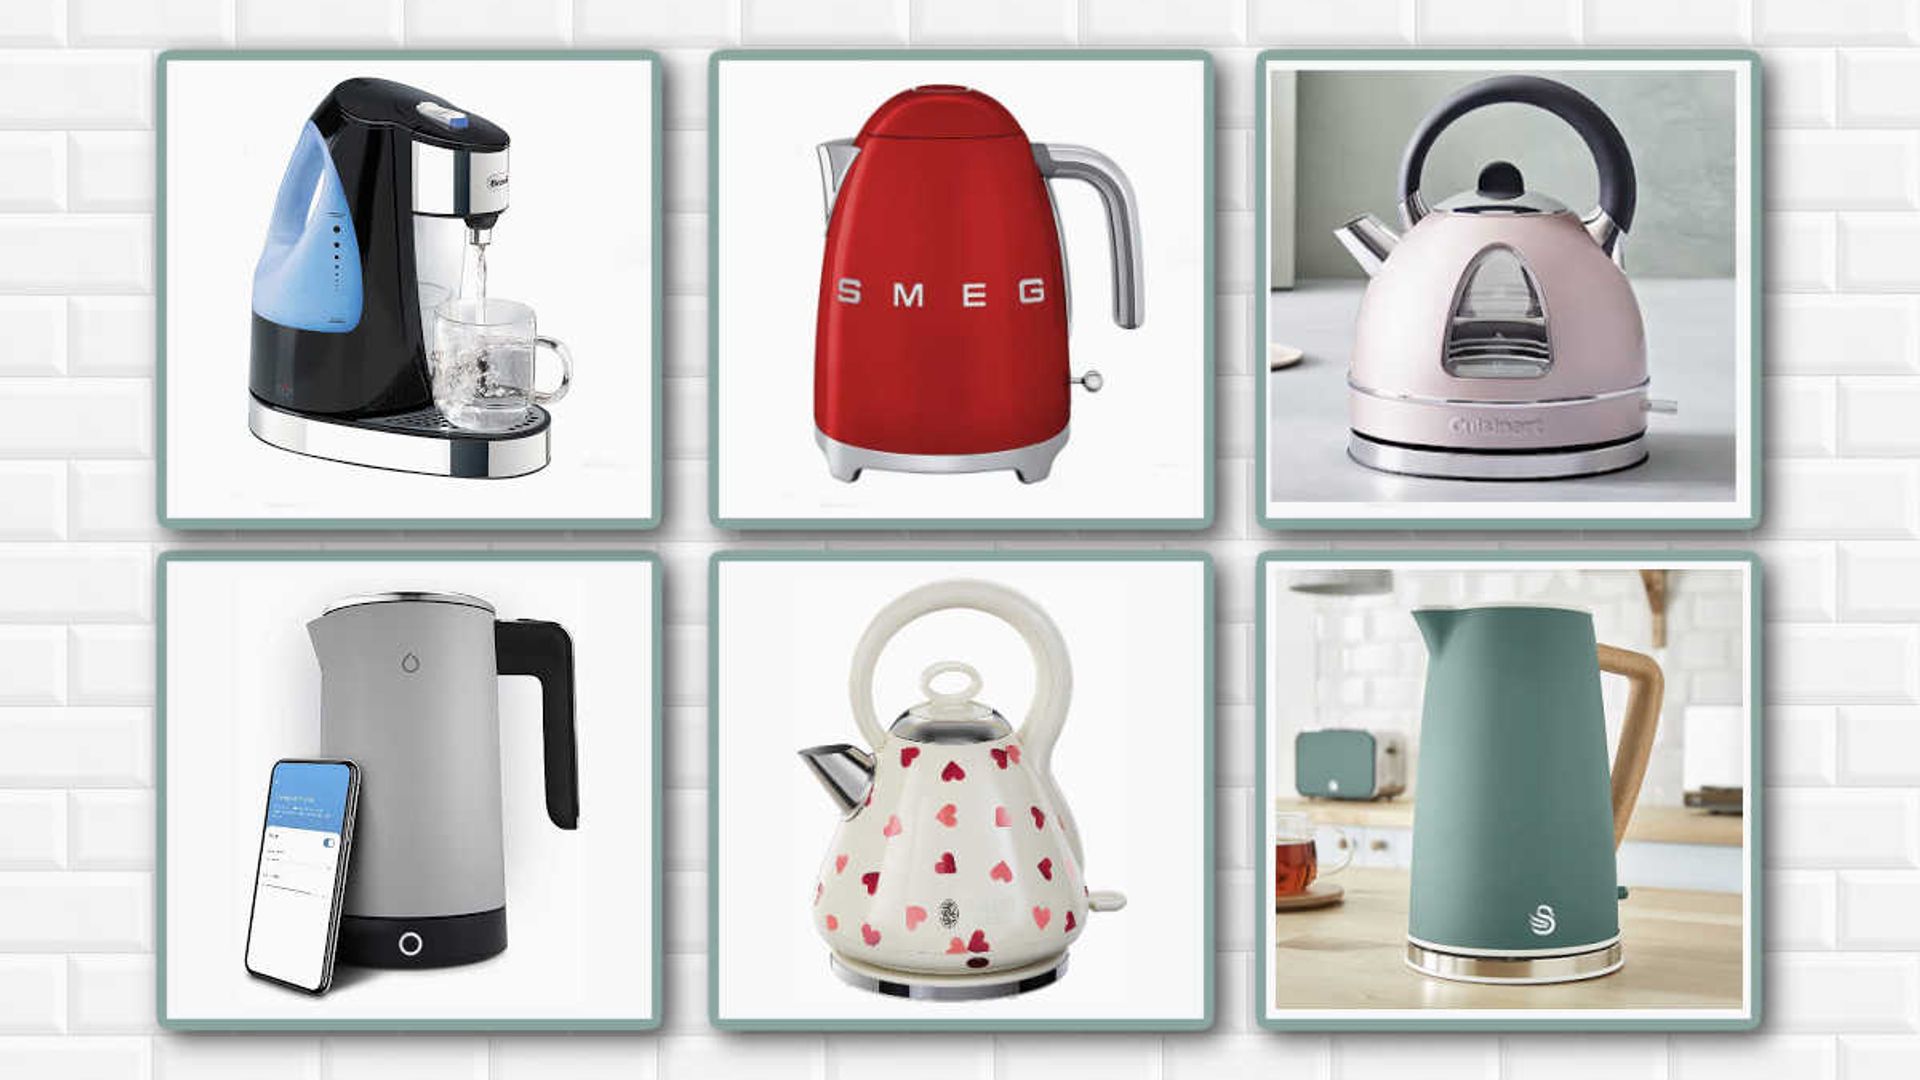 The Most Beautiful Design Kettle from Smeg –